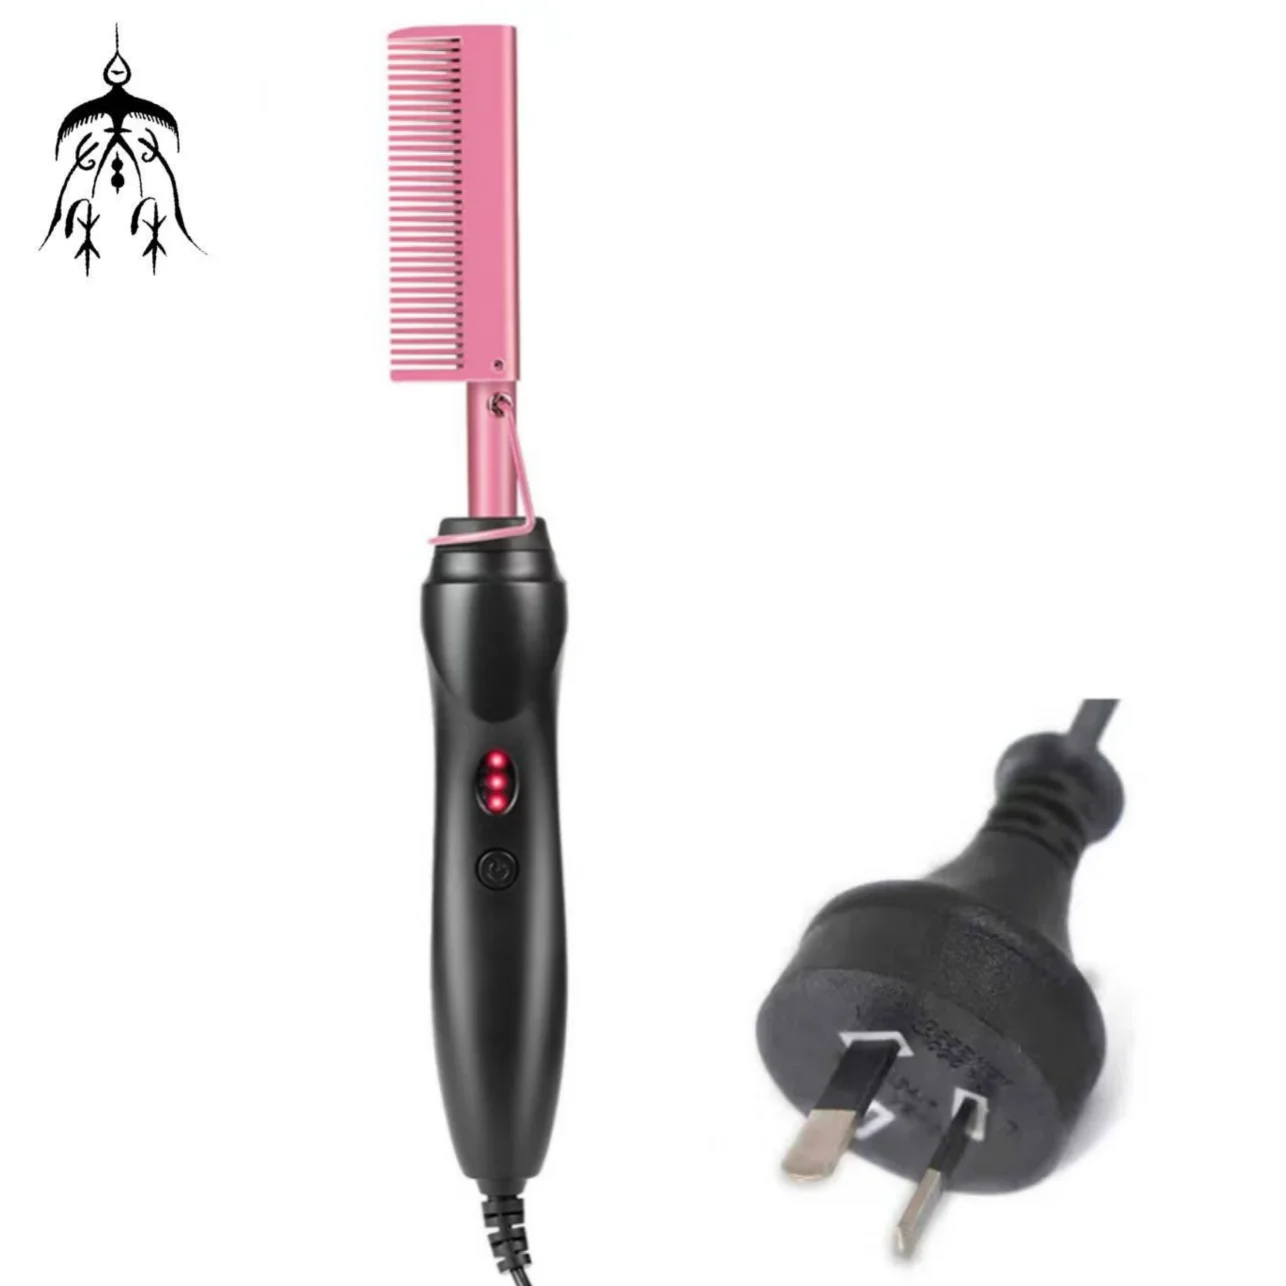 

2022 Amazon's New Professional Wet And Dry Hair Use Curling Iron High Heat Straightener Pressing Hot Comb